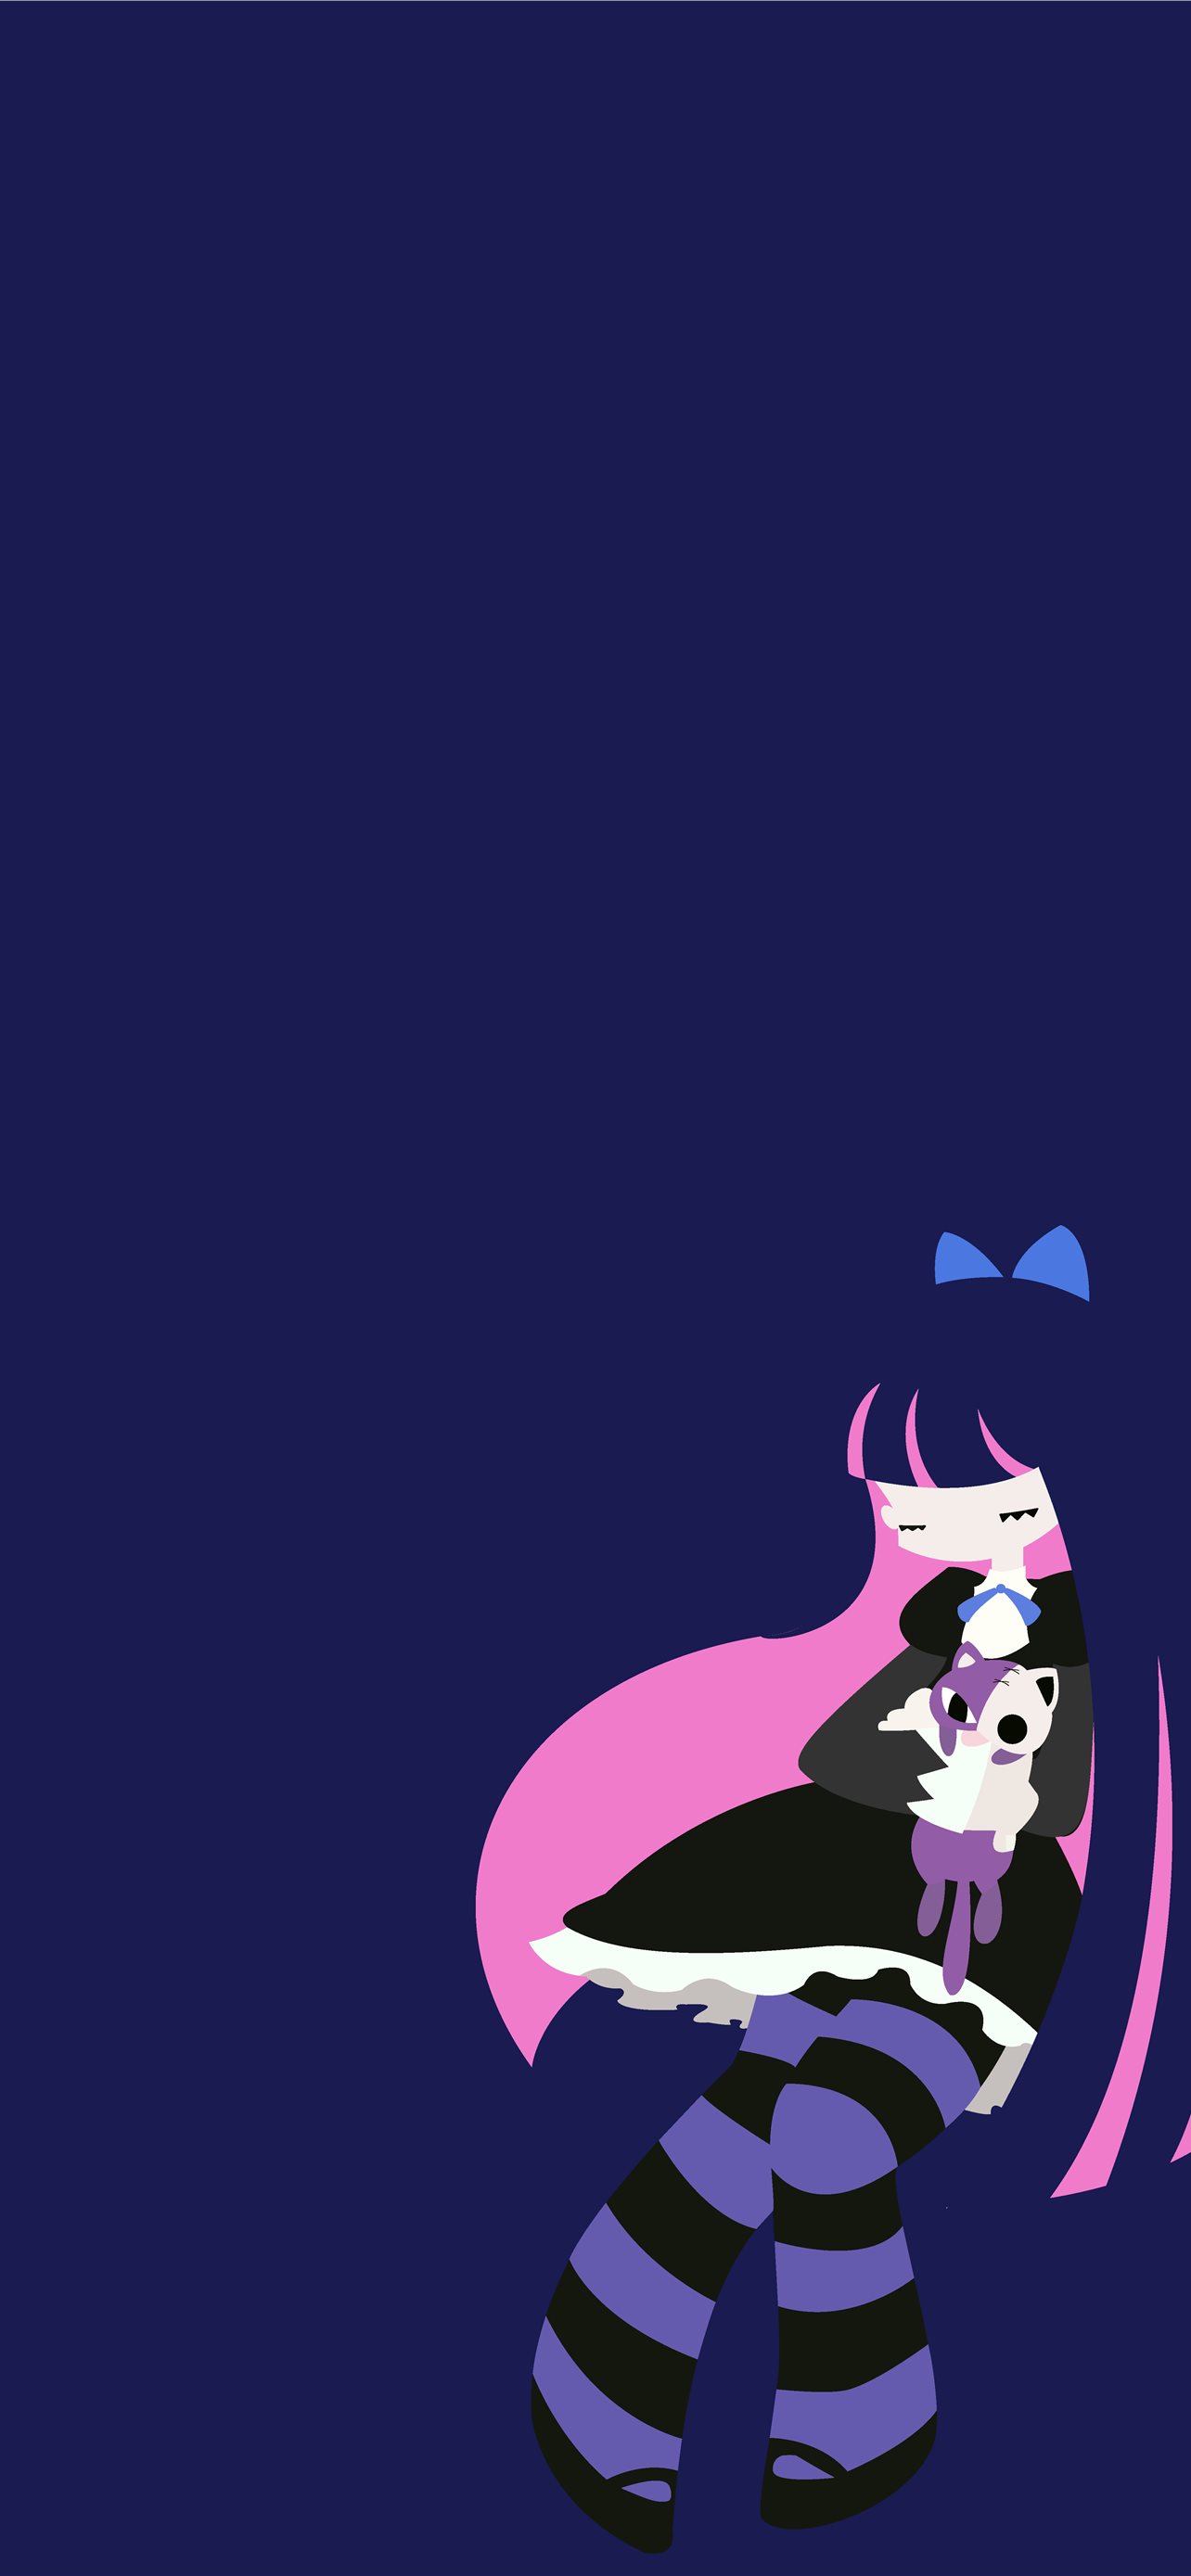 Stocking From Panty Stocking Album On Imgur Iphone Wallpapers Free Download 